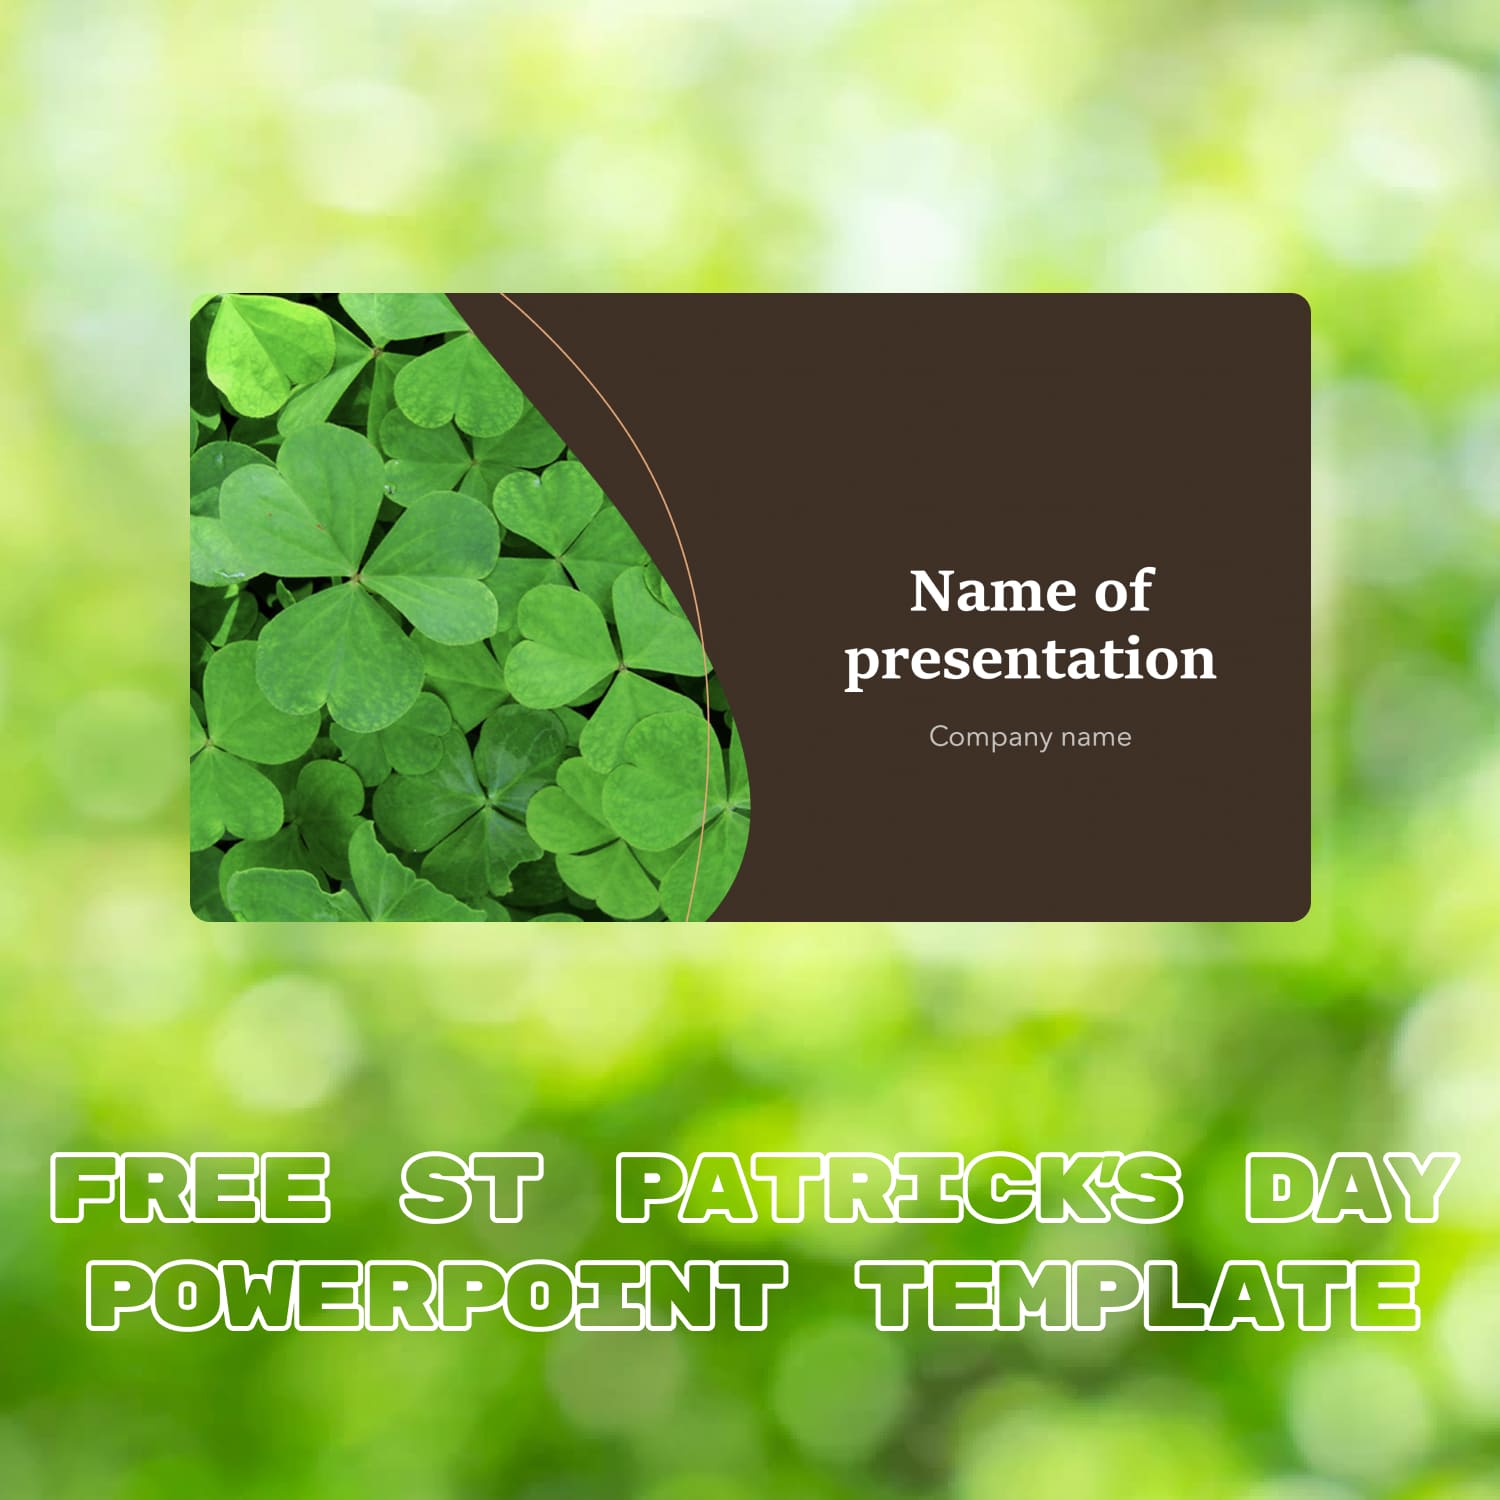 Free St Patrick's Day Powerpoint Template With Clover.